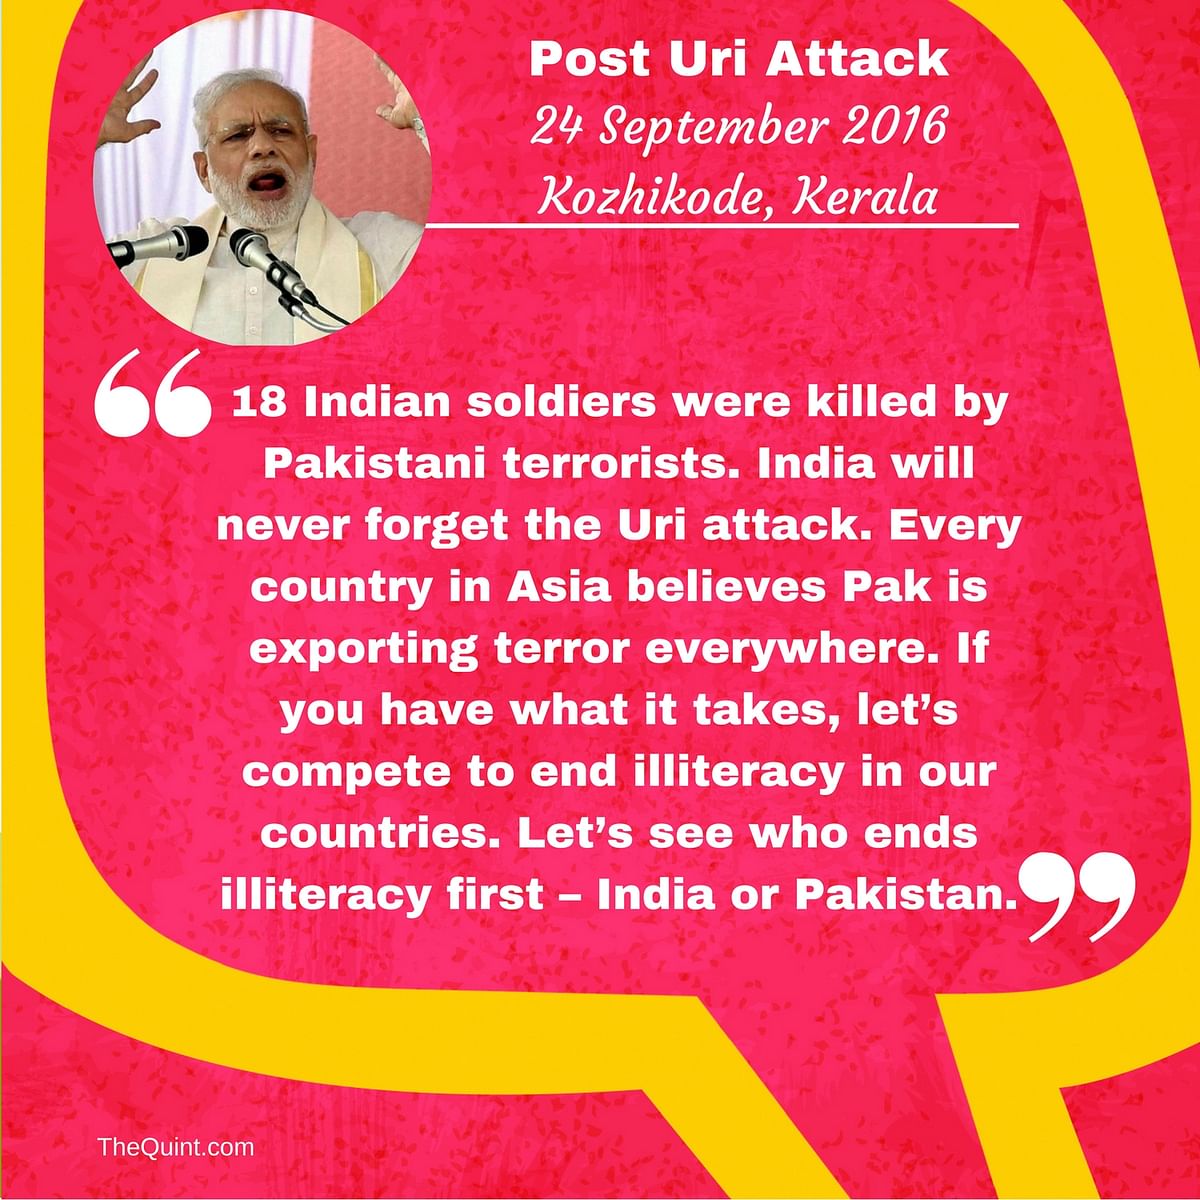 5 speeches of Narendra Modi that moved the nation, challenged Pakistan and cemented India’s position in the world.